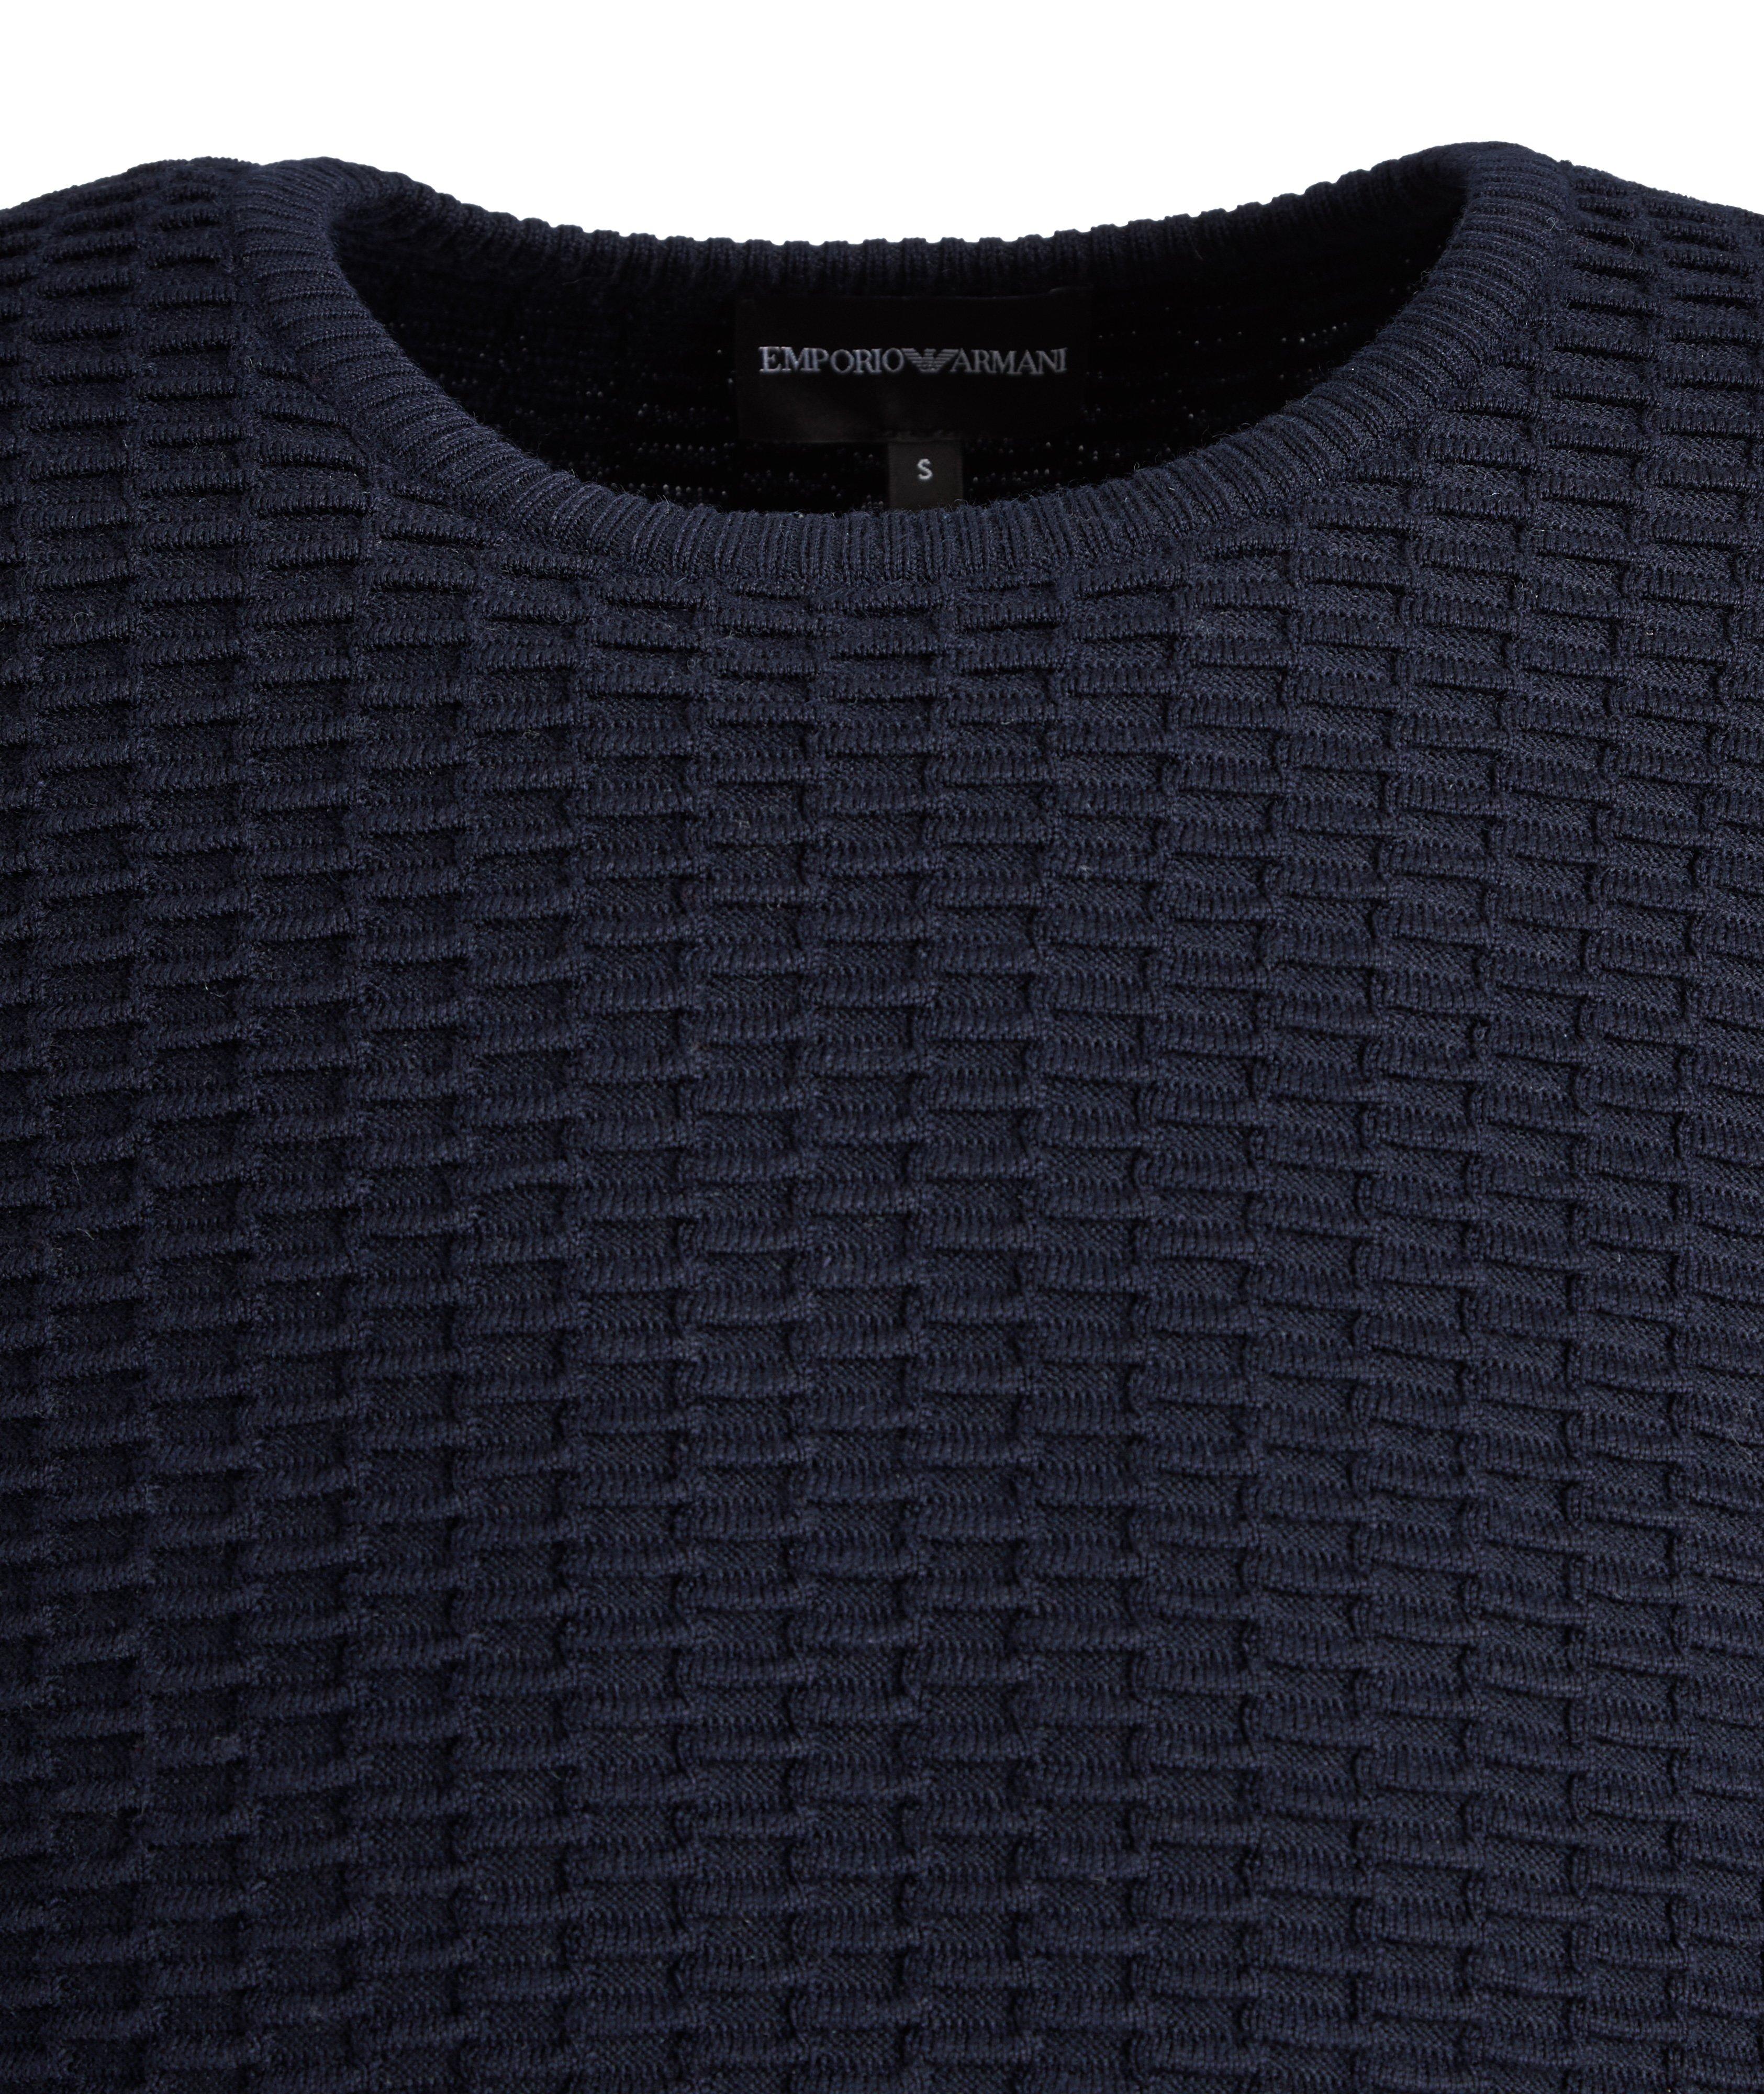 Textured Knit Wool-Blend Sweater image 2